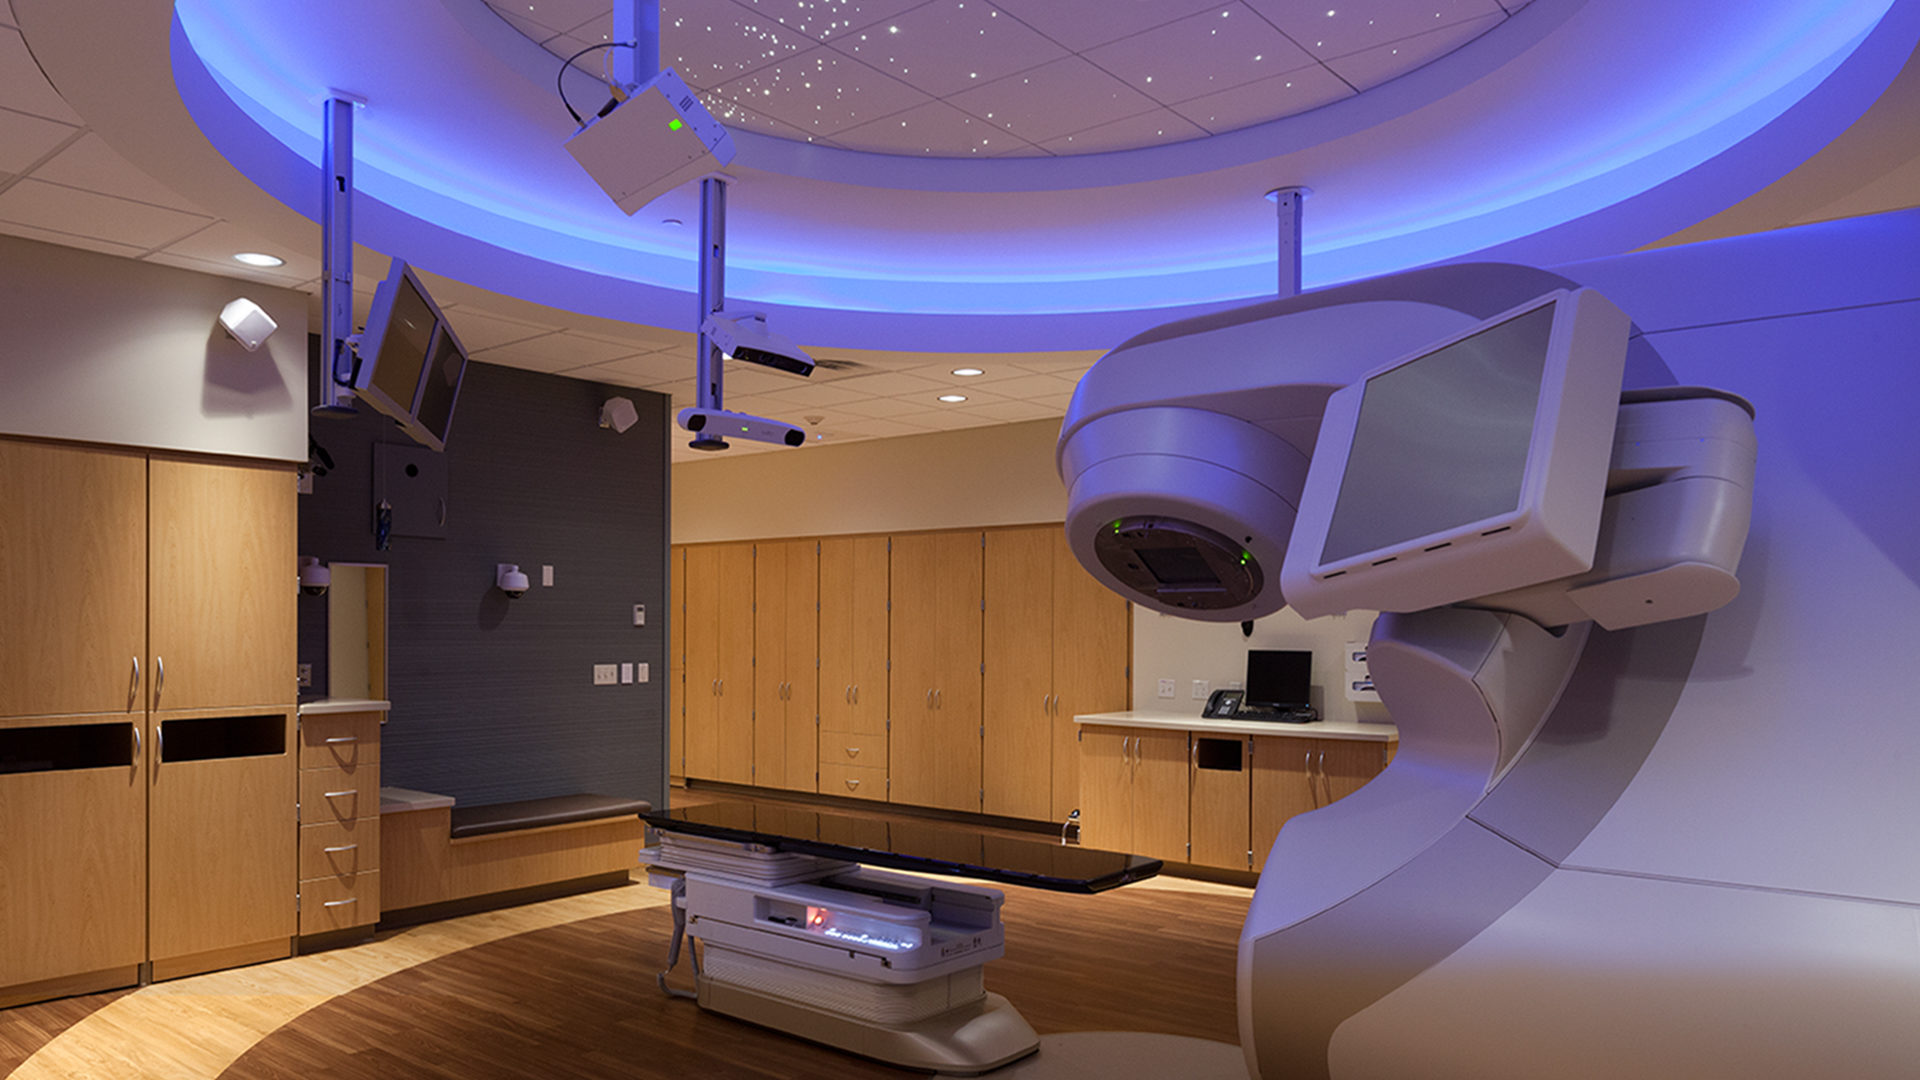 Woodwinds Hospital Cancer Center Woodbury MN Truebeam Linear Accelerator for Radiation Therapy